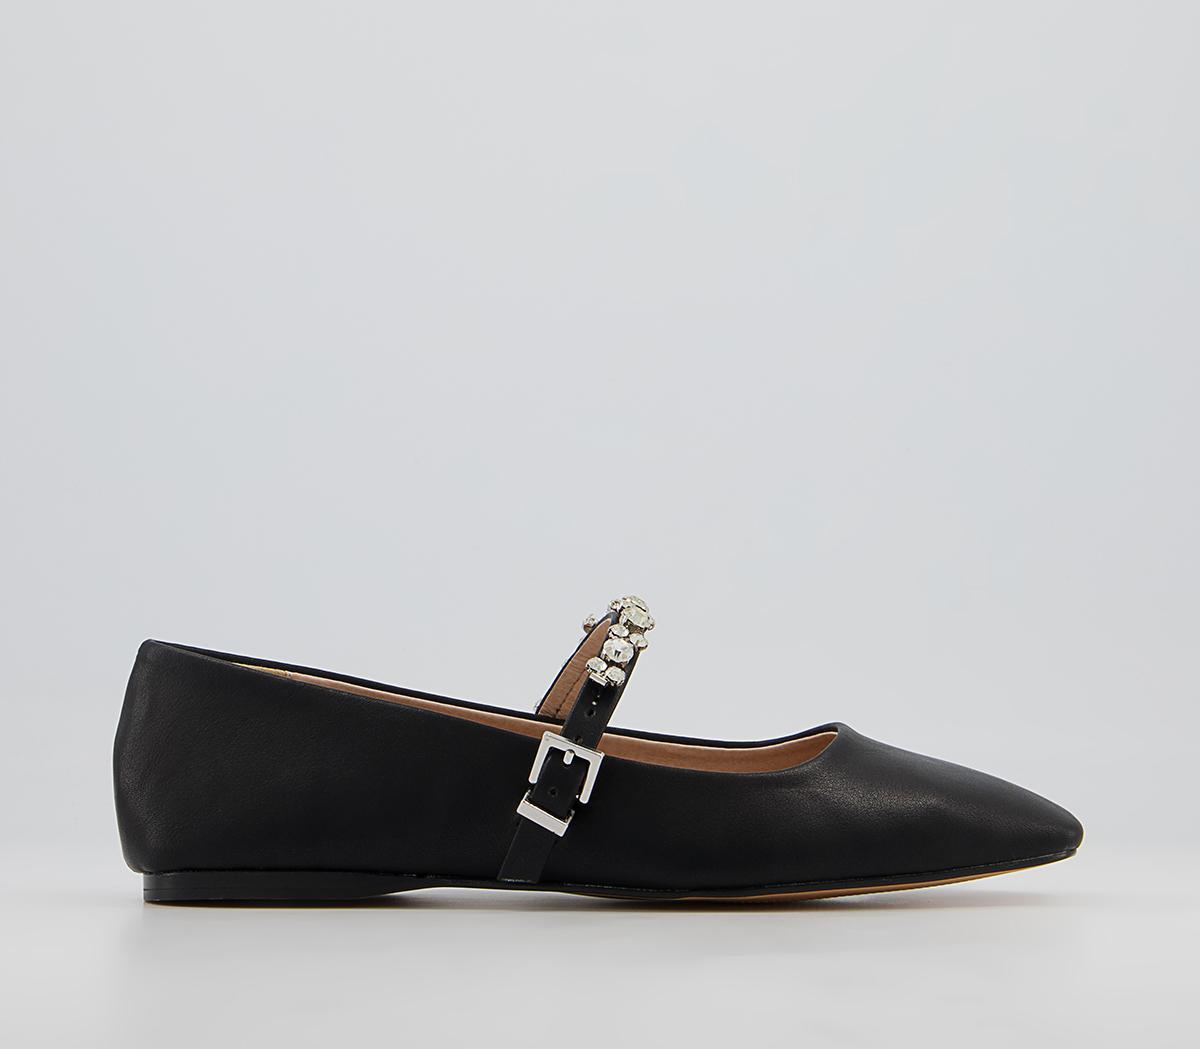 OFFICE Formerly Soft Square Mary Jane Flats Black With Embellishment ...